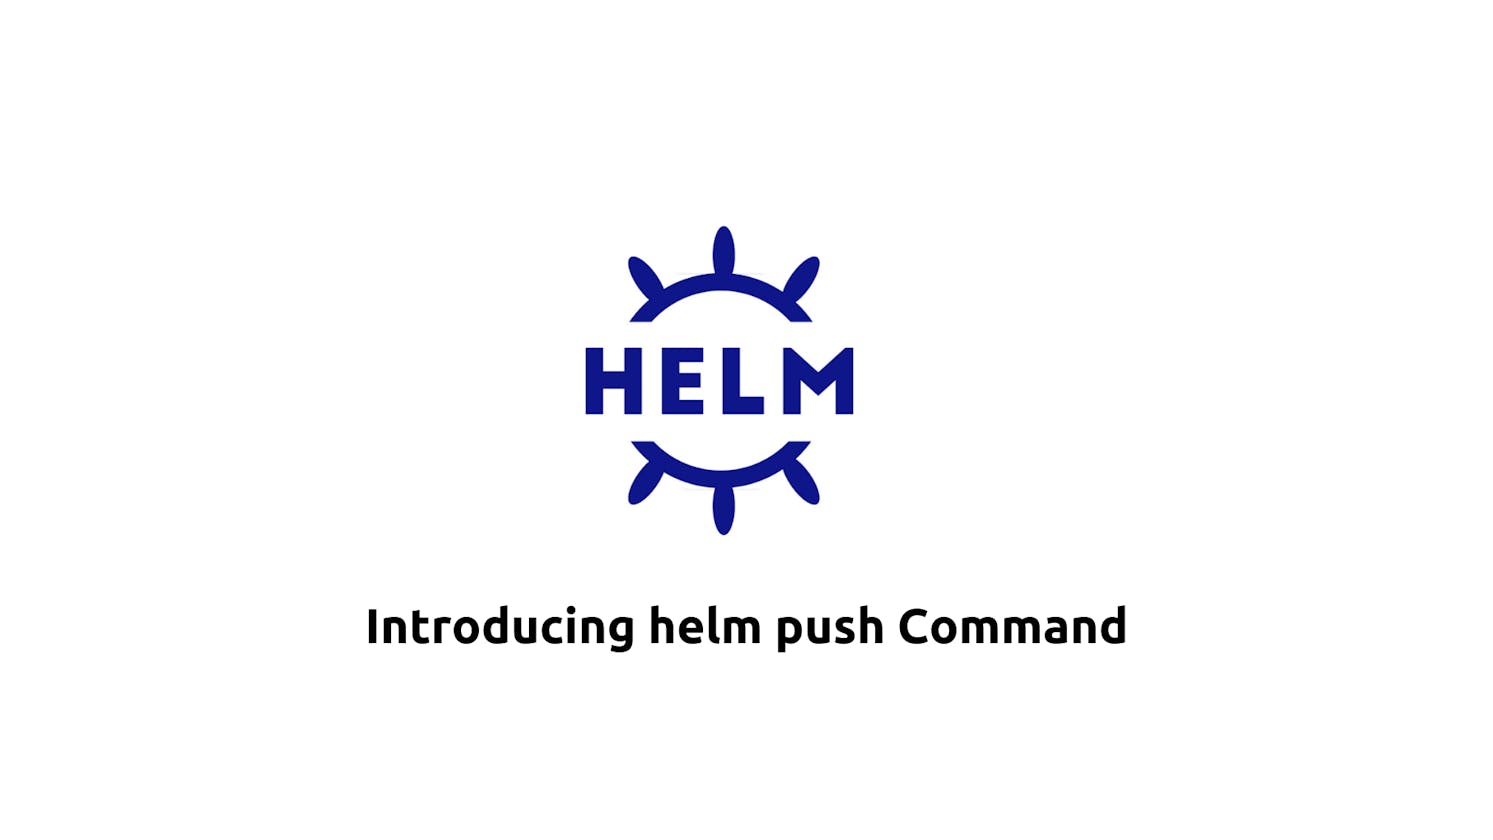 Introducing helm push Command